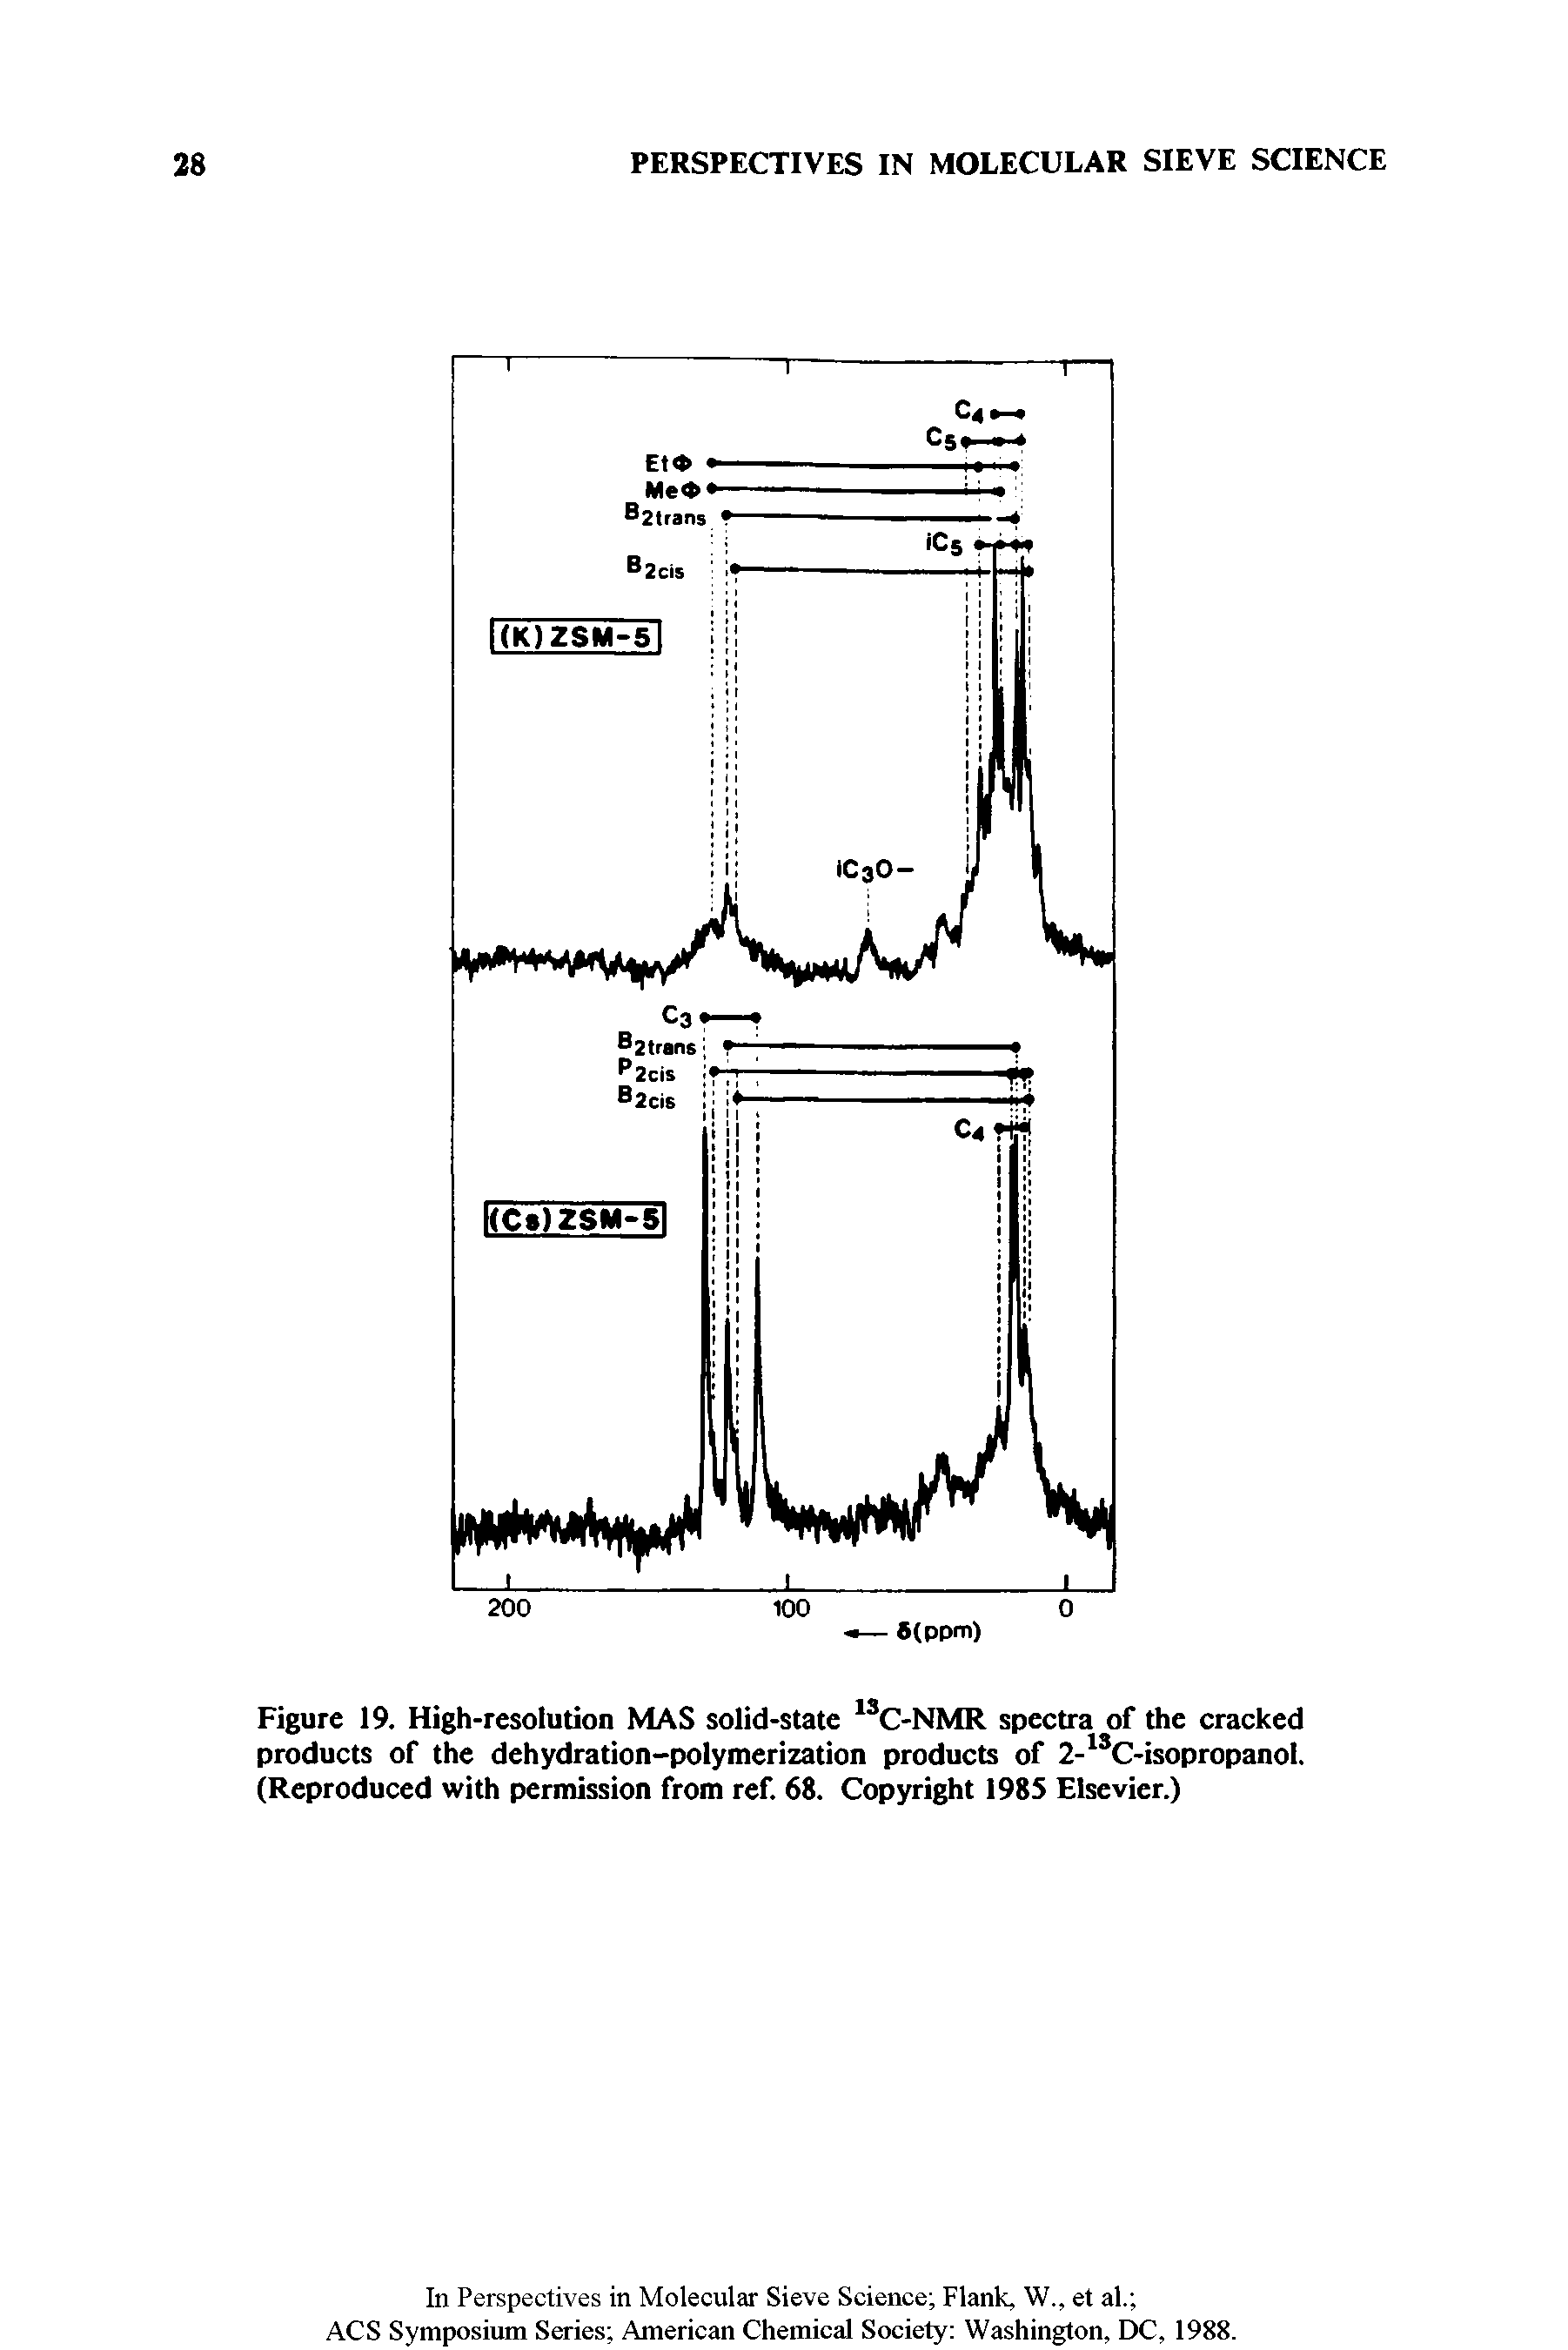 Figure 19. High-resolution MAS solid-state 1SC-NMR spectra of the cracked products of the dehydration-polymerization products of 2-lsC-isopropanol. (Reproduced with permission from ref. 68. Copyright 1985 Elsevier.)...